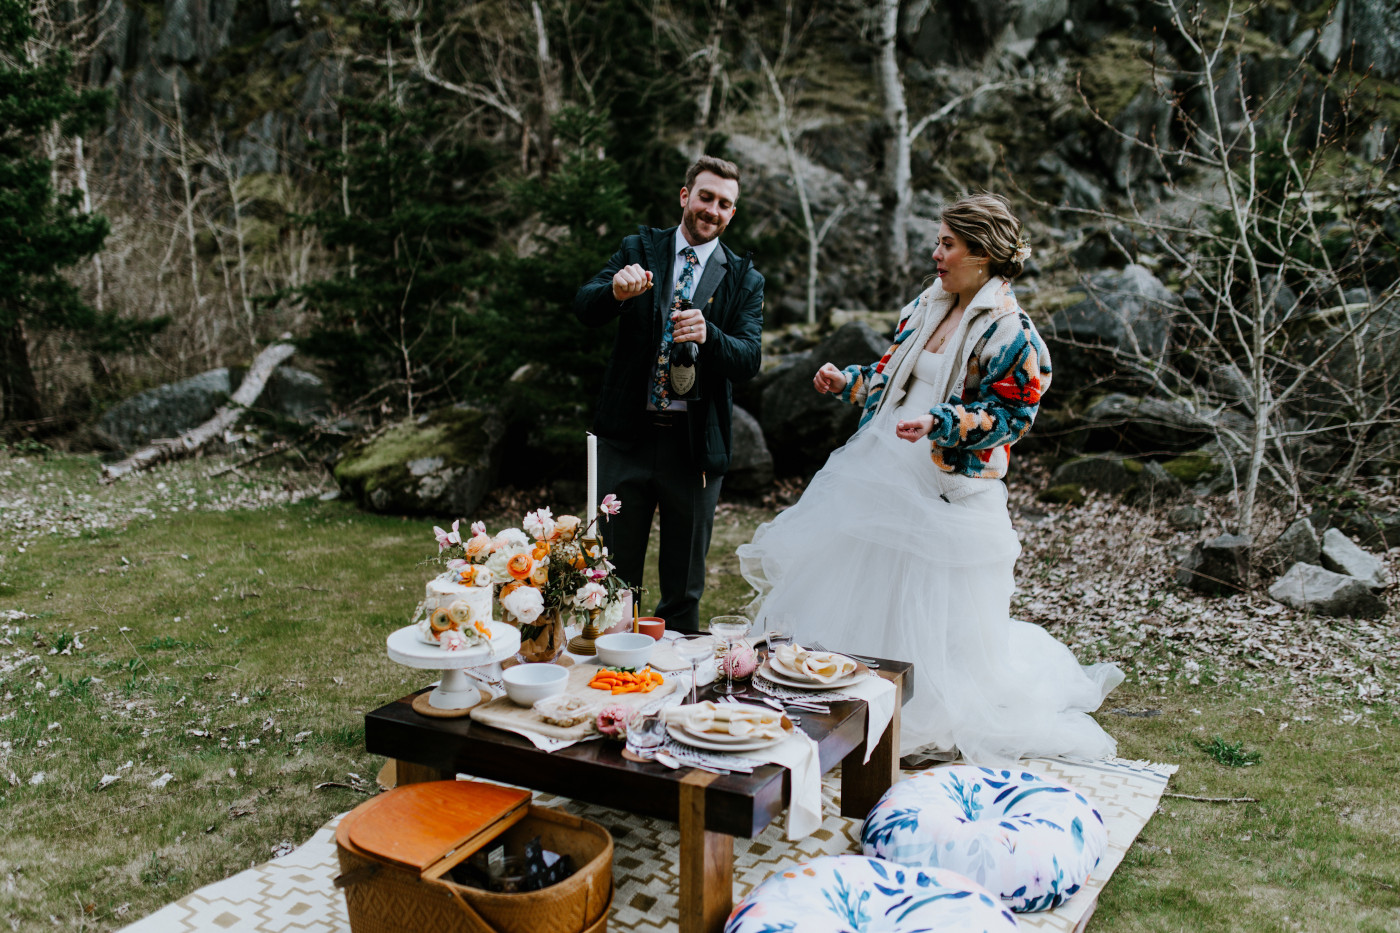 Allison and Lennie pop champagne at their elopement dinner picnic. Elopement photography at Columbia River Gorge by Sienna Plus Josh.